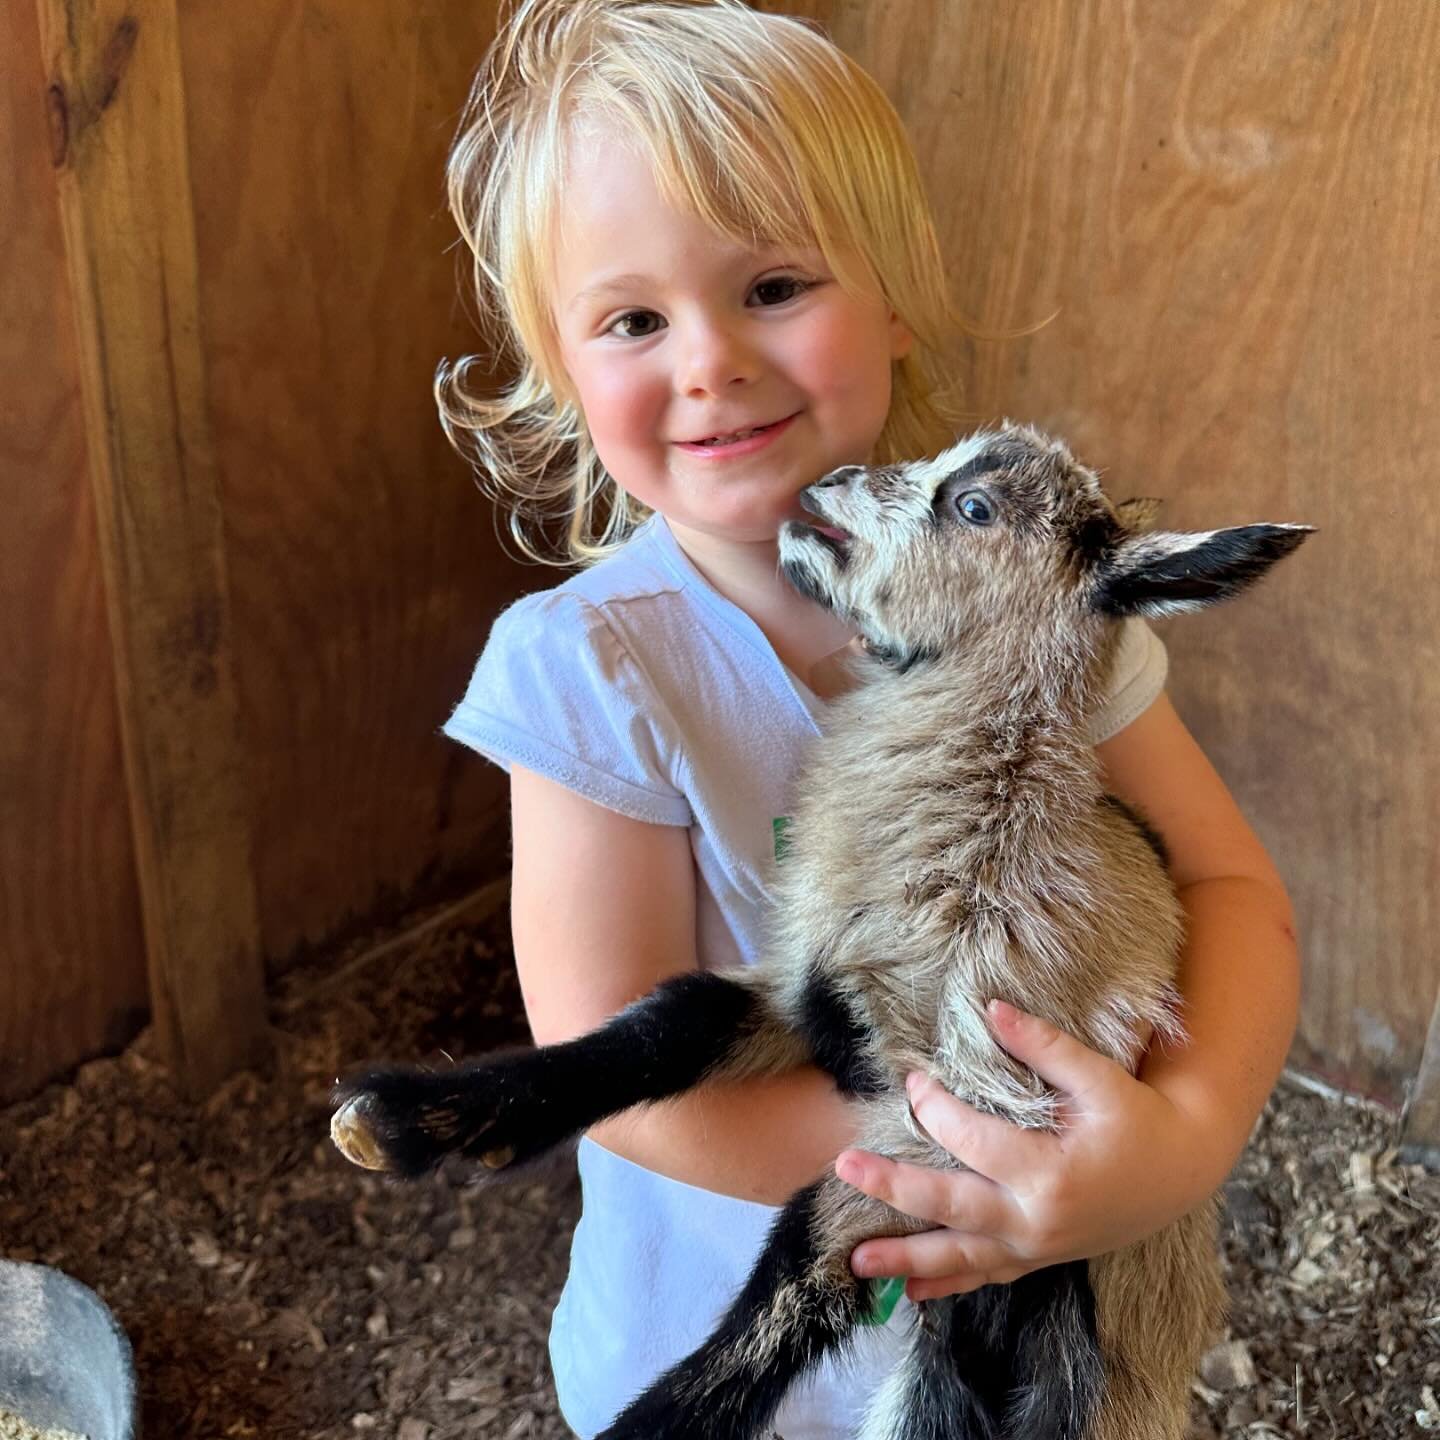 So many sweet learning moments growing up on a farm 🌞 a new baby goat was born today from our Alpine and  Nigerian Dwarf. Hope is smitten with little Miley #babygoats #nigeriandwarfgoats #farmlife